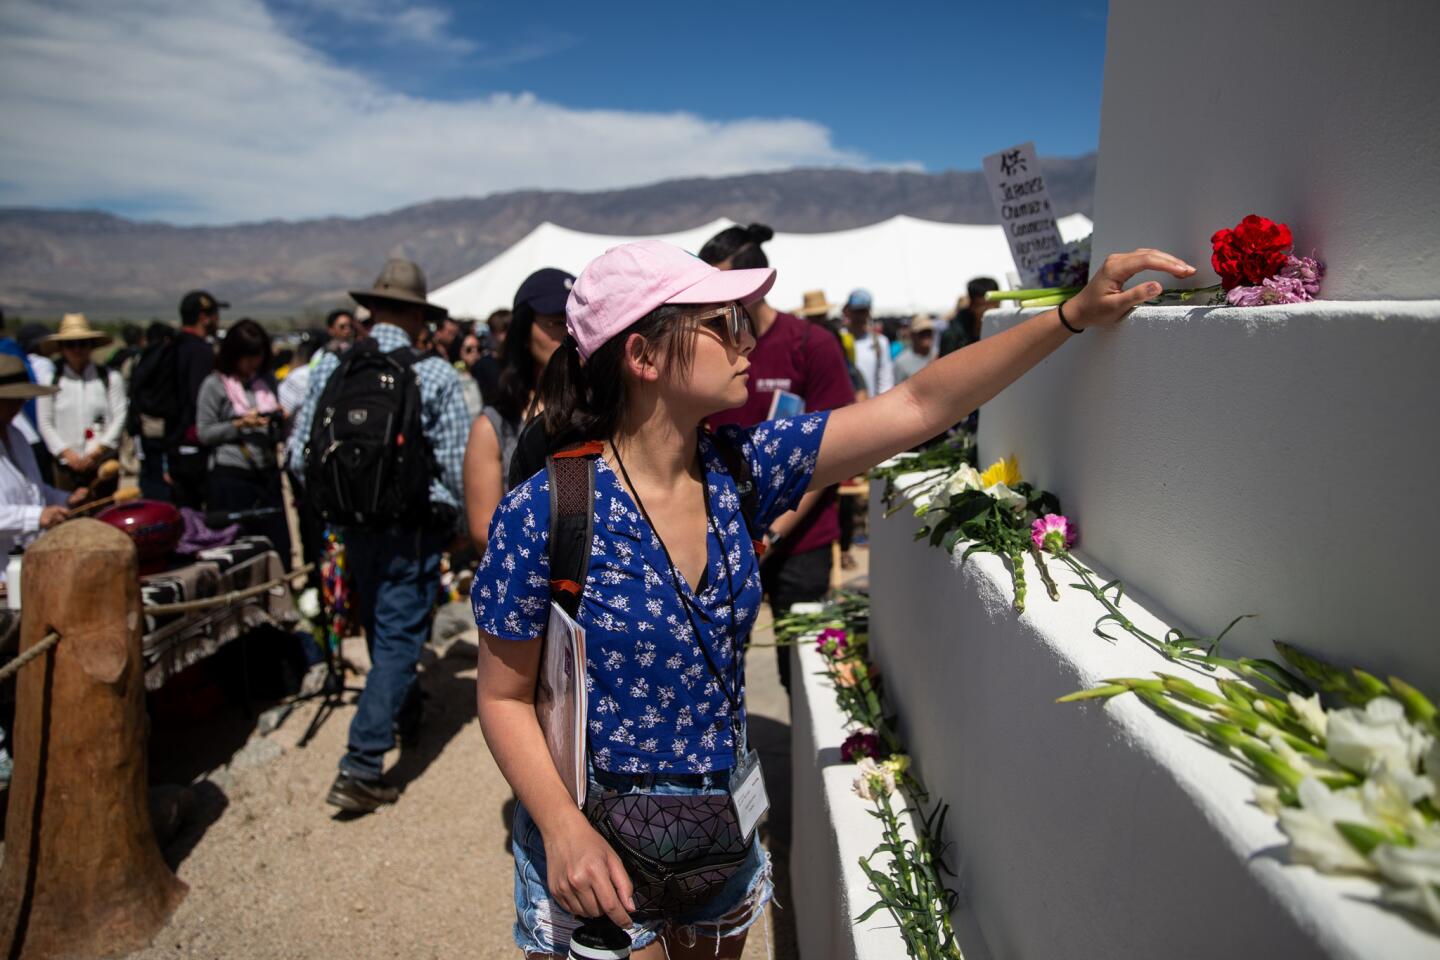 Alana Mouchard, 24, of Irvine, places a flower on a cemetery monument during the annual Manzanar Pilgrimage at the Manzanar National Historic Site.